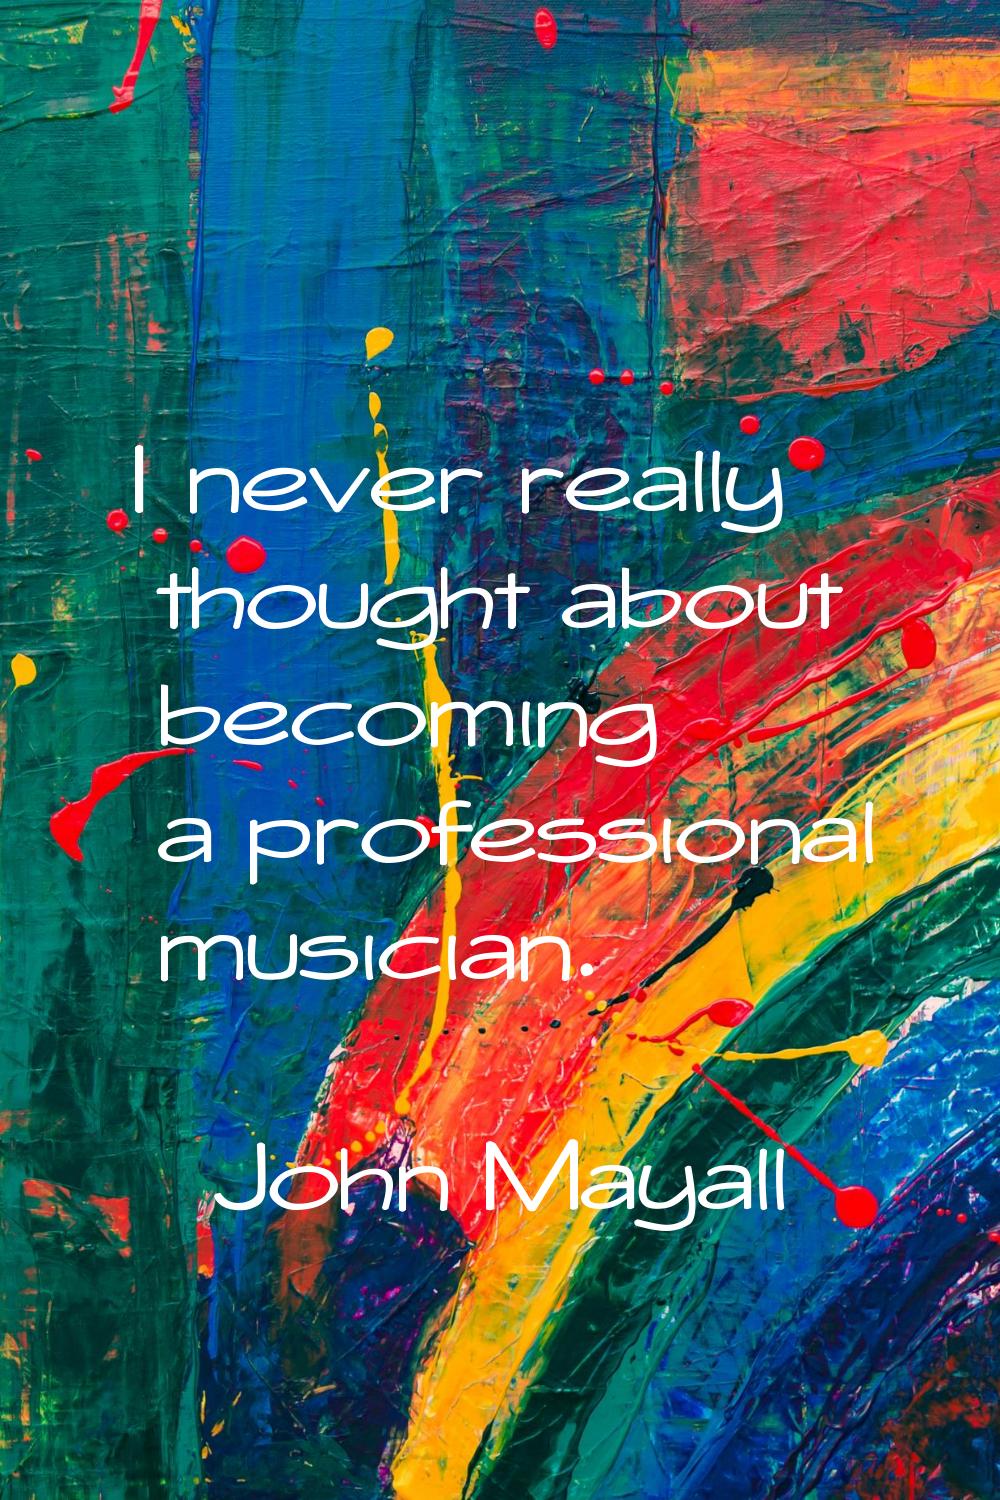 I never really thought about becoming a professional musician.